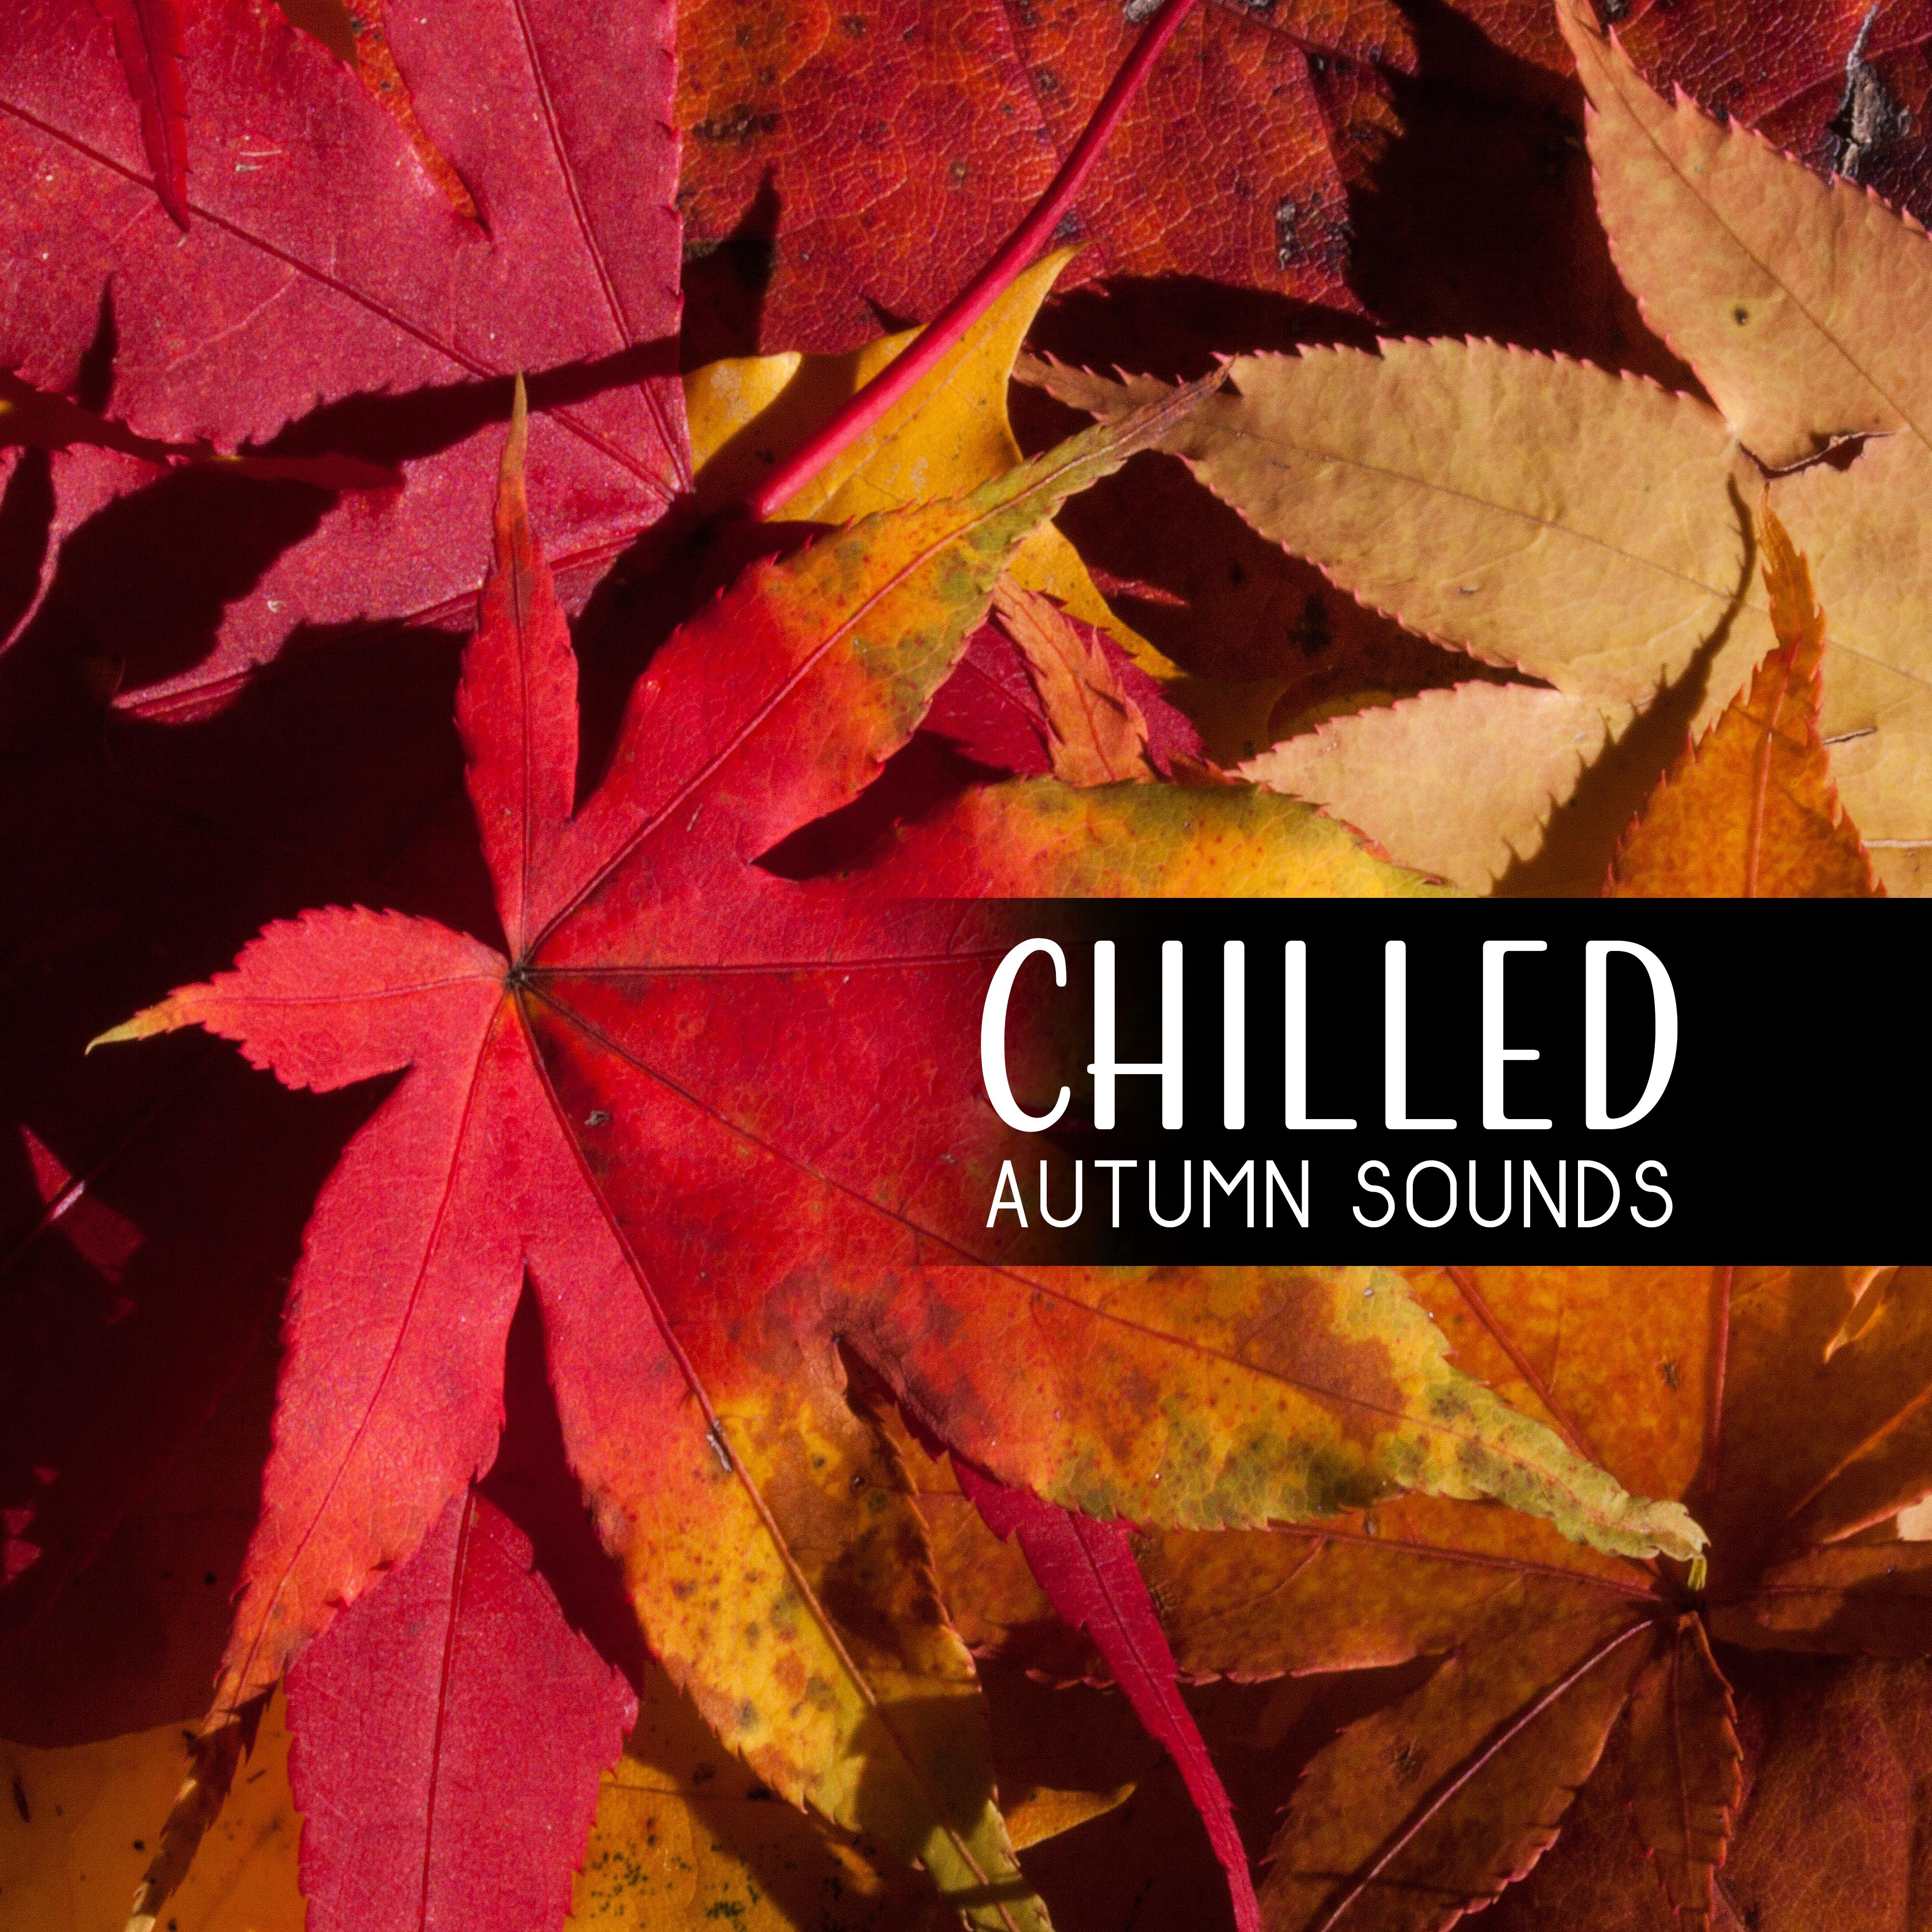 Chilled Autumn Sounds